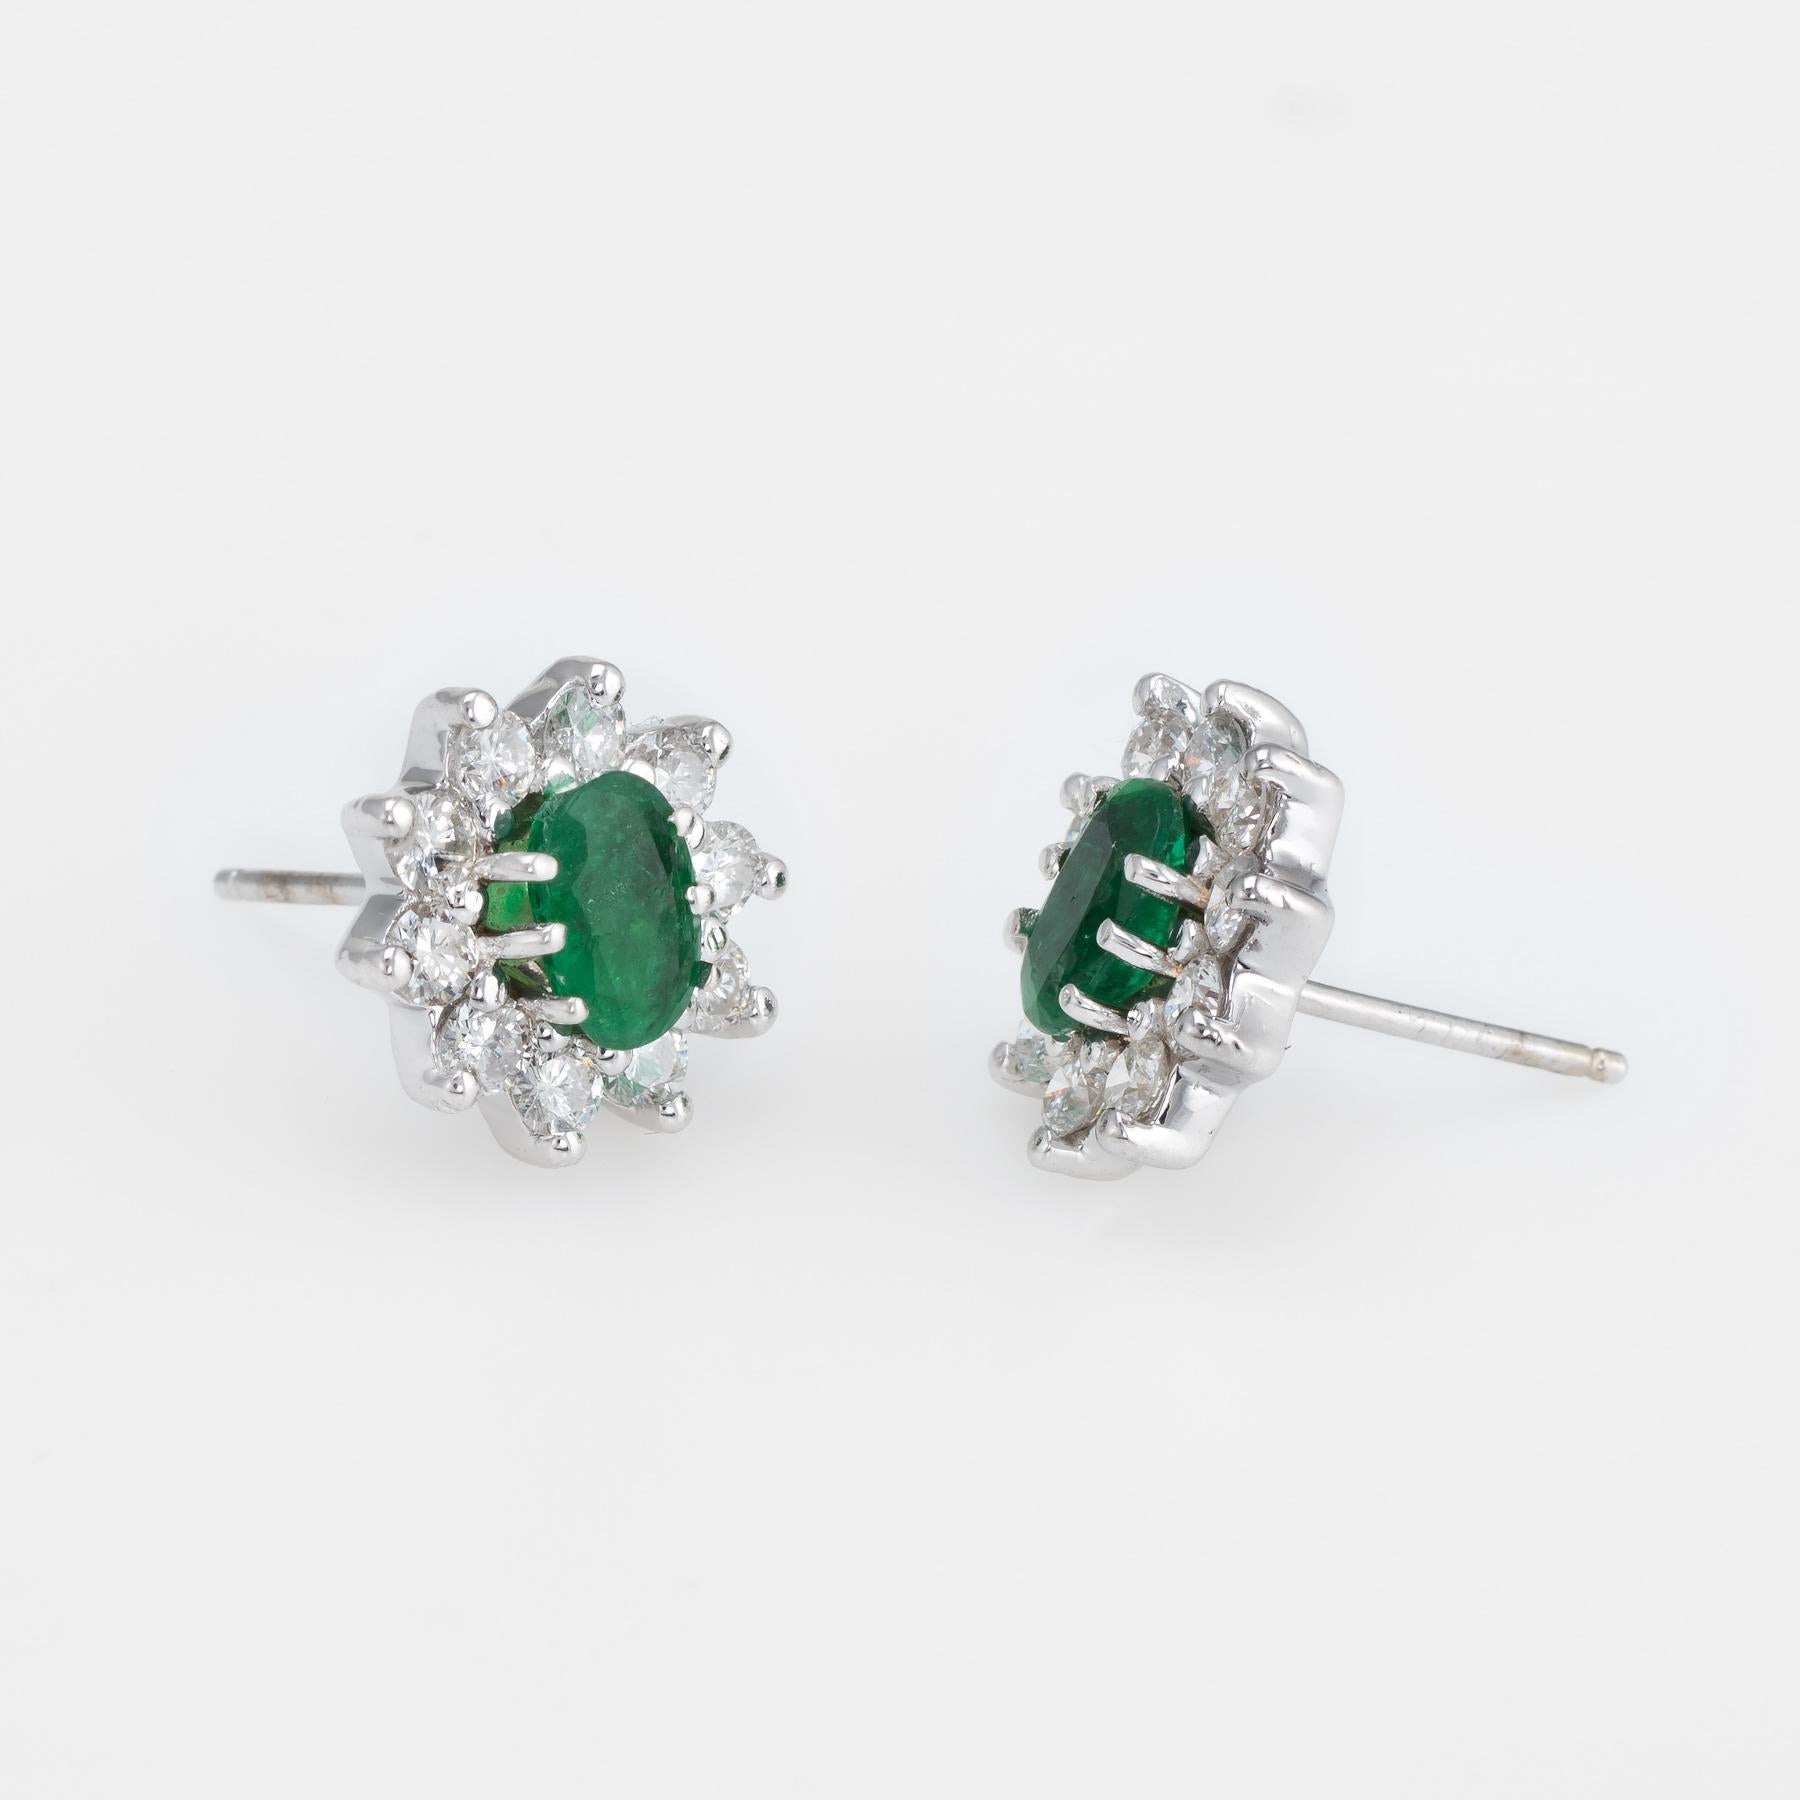 Elegant pair of estate emerald & diamond oval stud earrings, crafted in 14k white gold. 

Oval faceted emeralds measure 6mm x 5mm (estimated at 0.50 carats each - 1 carat total estimated weight). The 20 round brilliant cut diamonds (10 per earring)